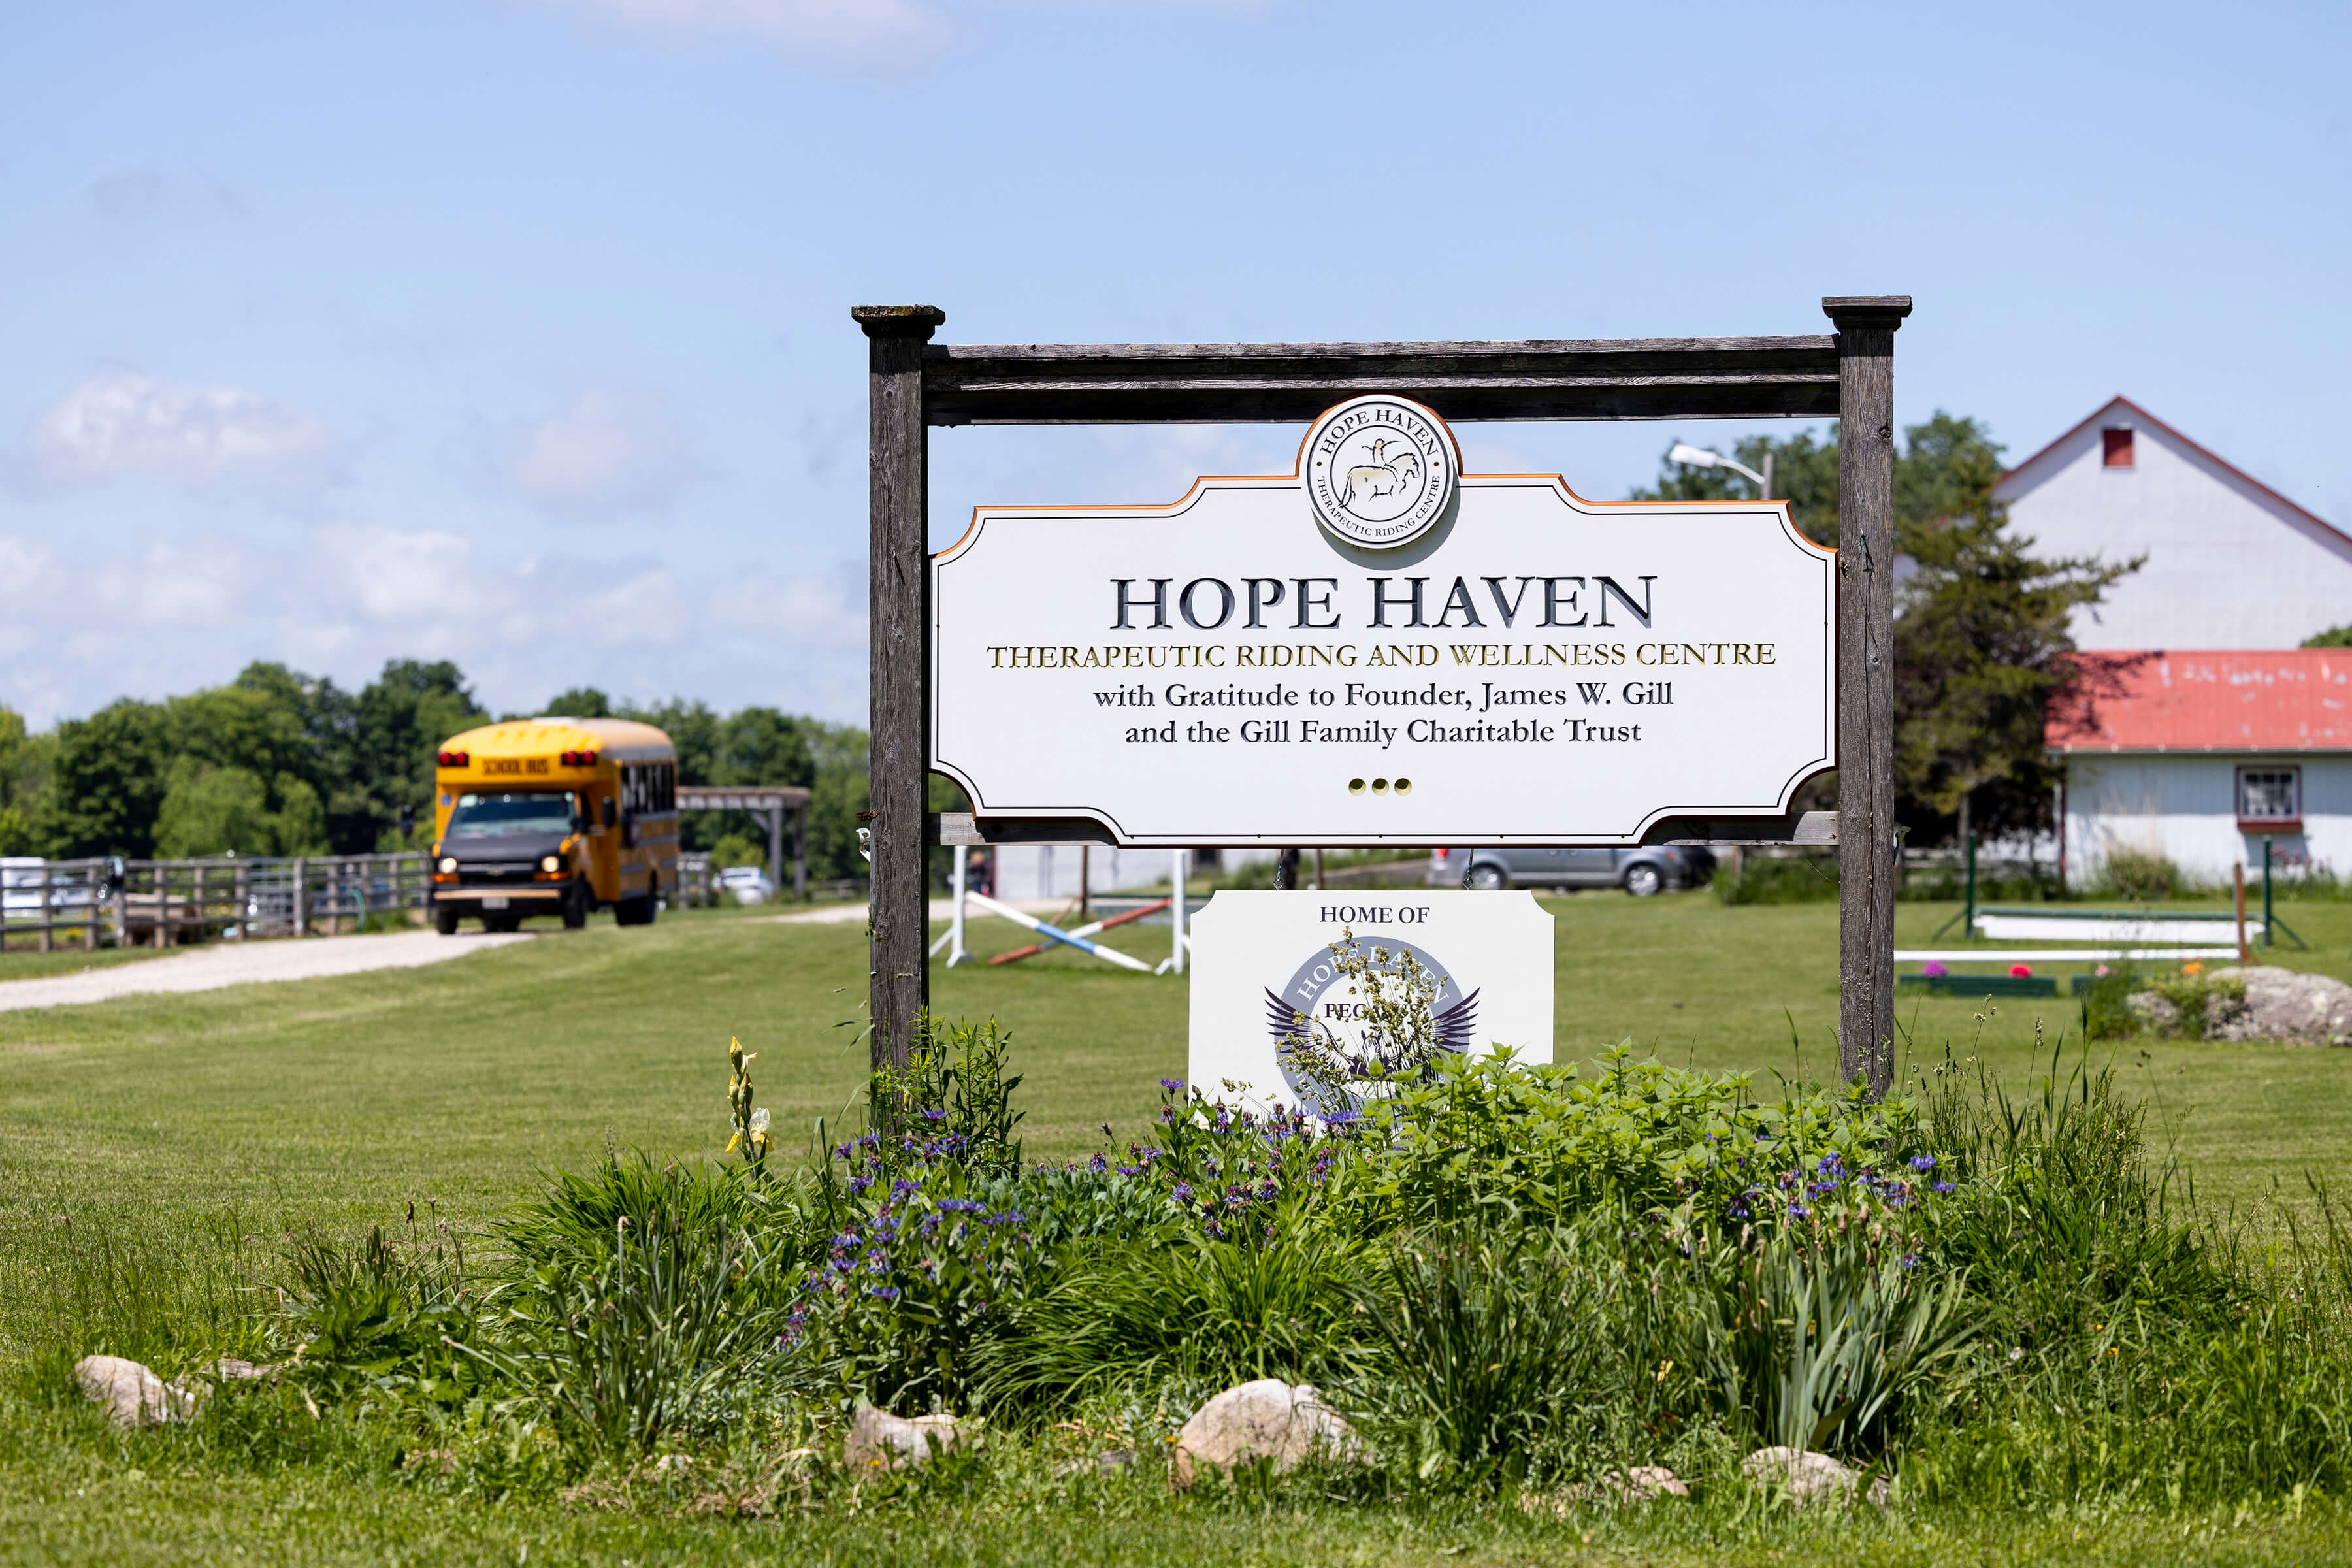 Watch the video on Hope Haven Therapeutic Riding Centre